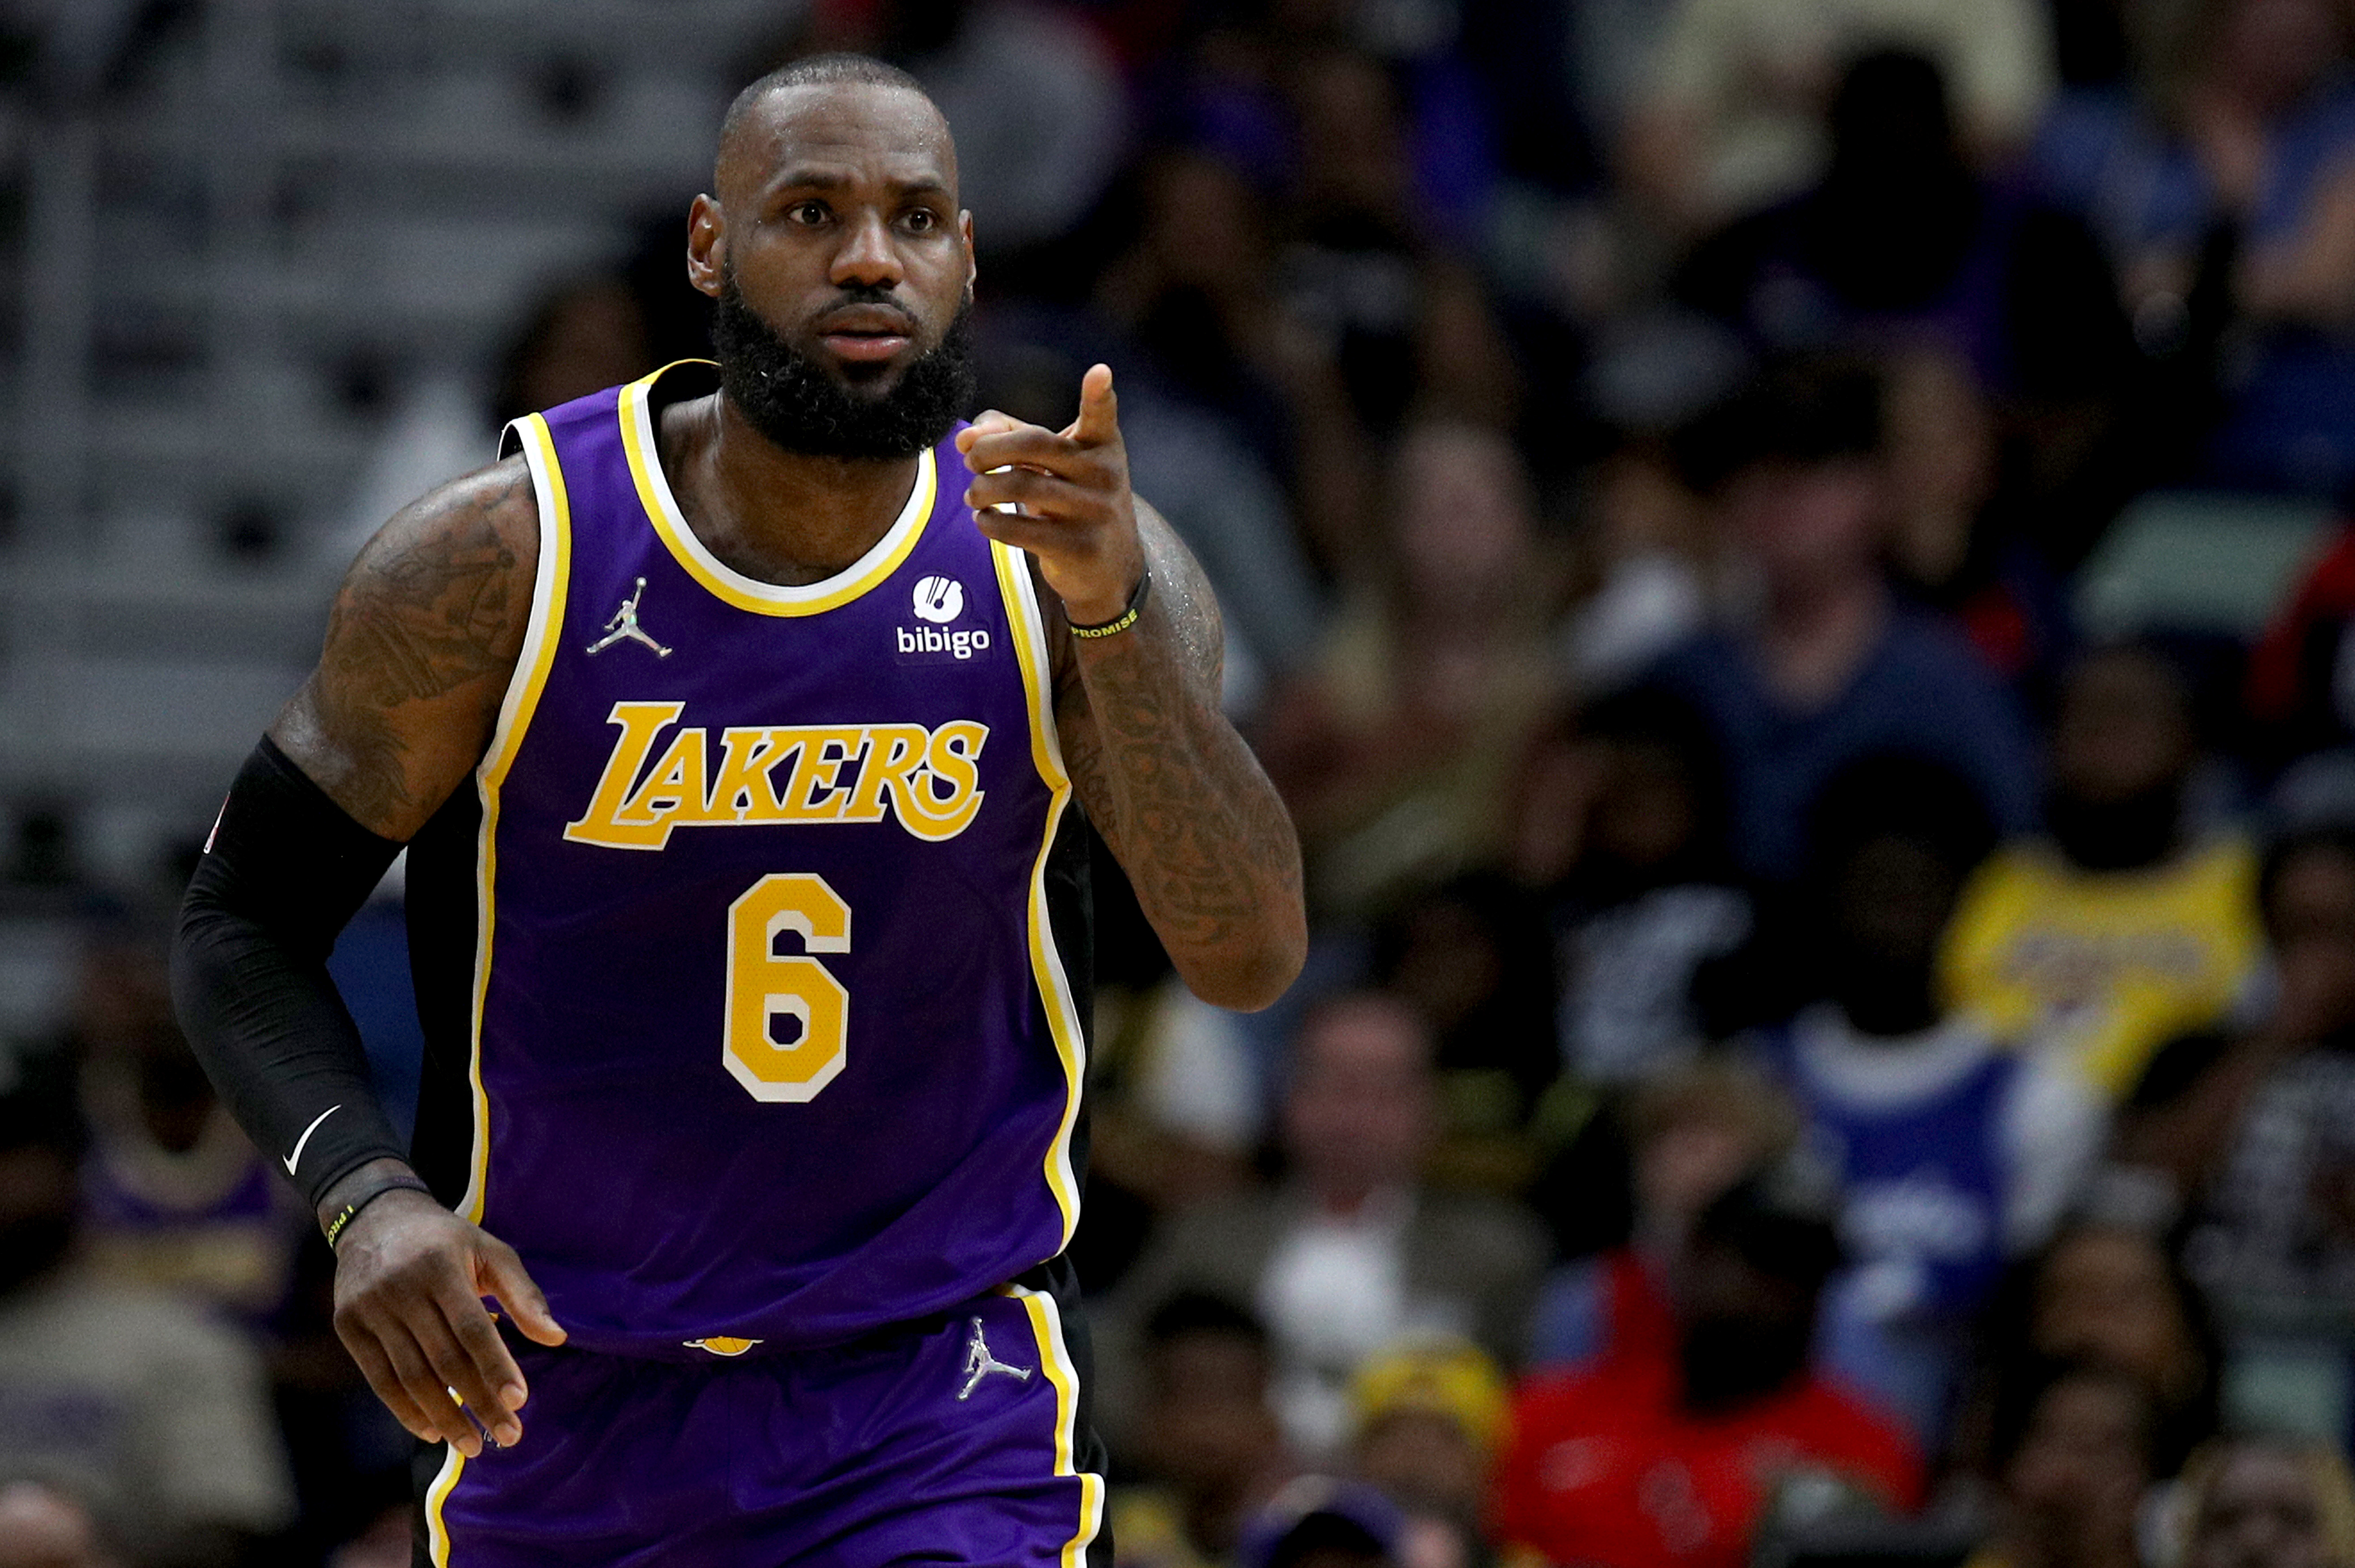 3 Things to Know about Shooting Stars, the Film about LeBron James